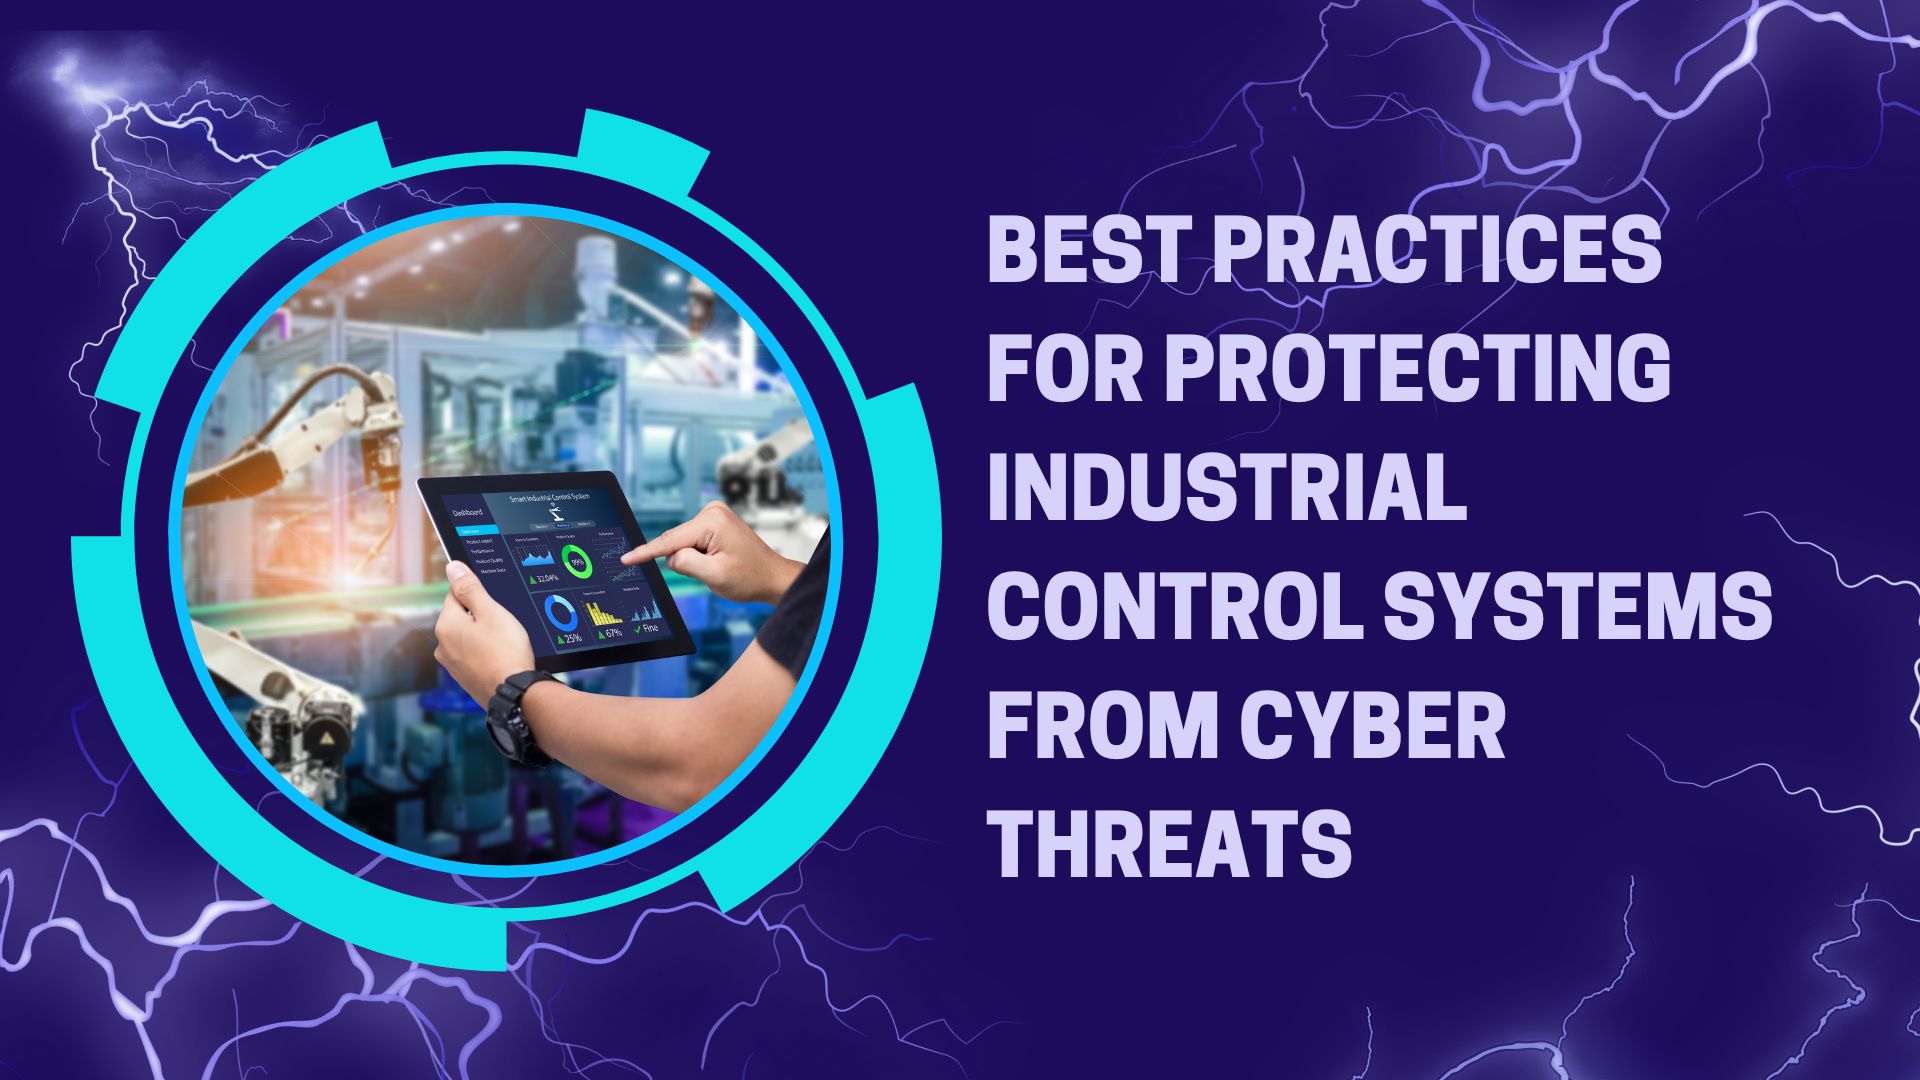 Best Practices for Protecting Industrial Control Systems from Cyber Threats